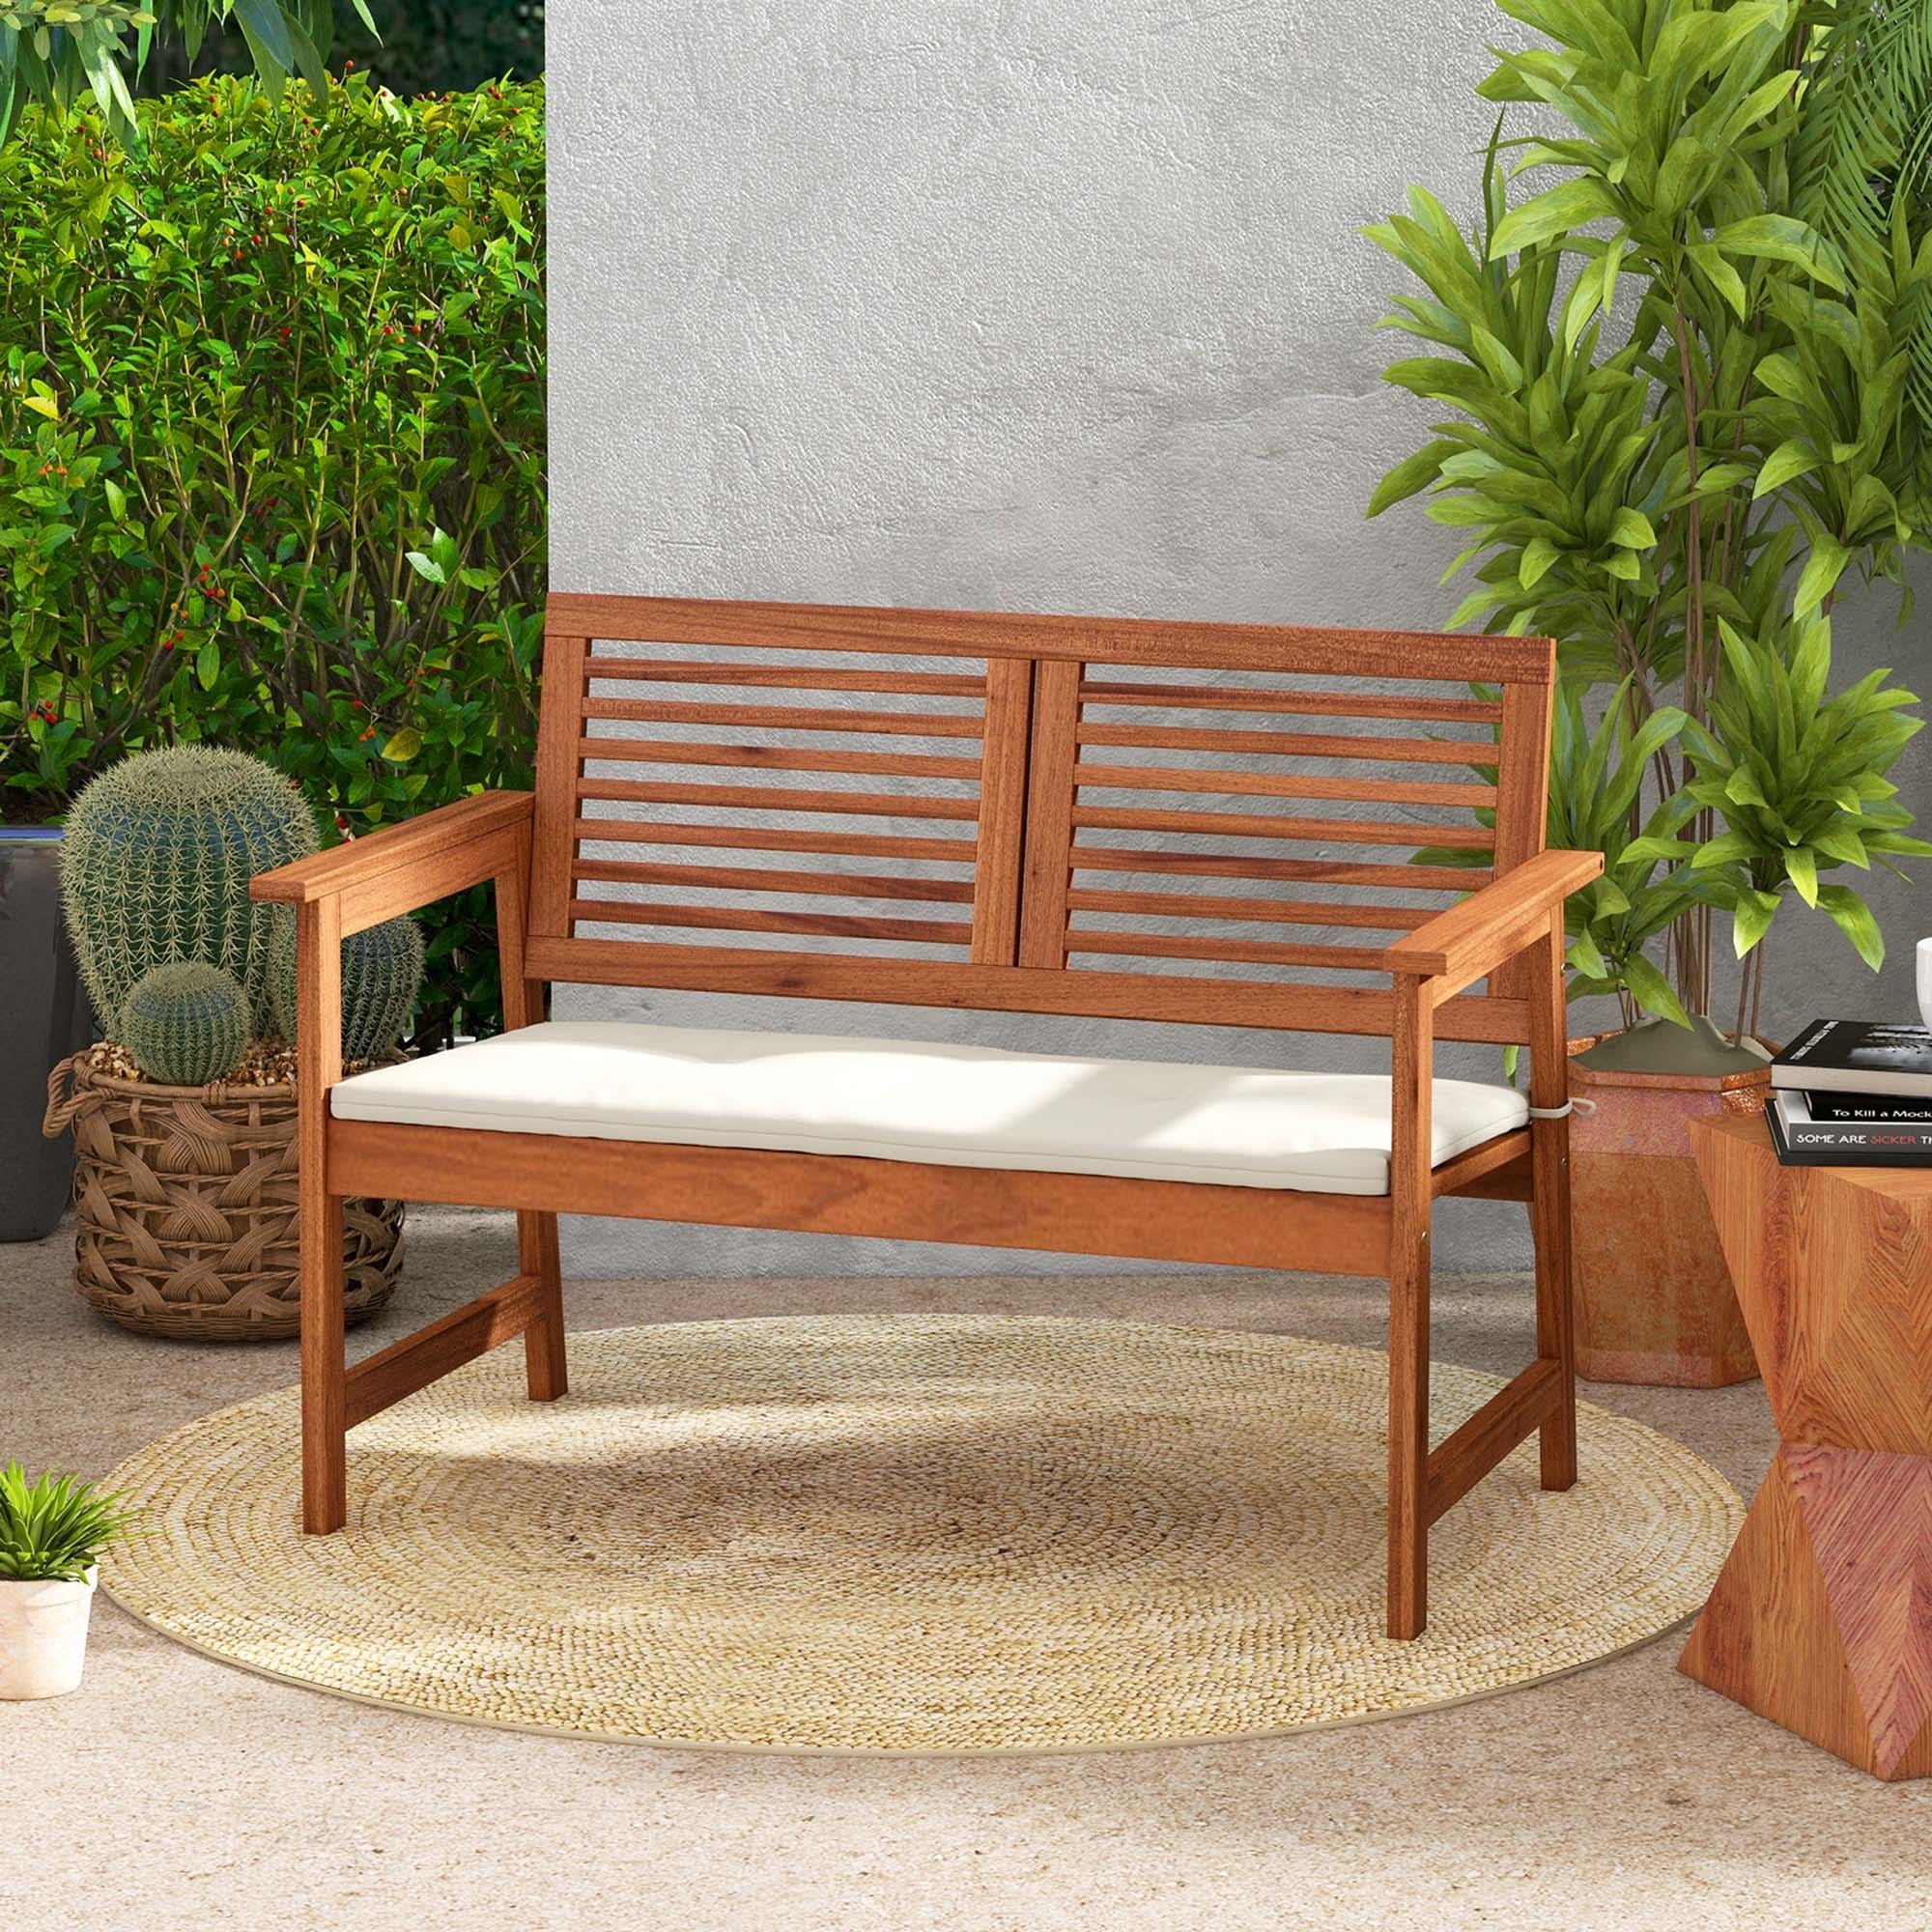 https://ak1.ostkcdn.com/images/products/is/images/direct/a40e806a9efa66d1494a530a24a14a900c728919/Costway-Patio-Bench-Outdoor-Solid-Wood-Loveseat-Chair-with-Backrest-%26.jpg